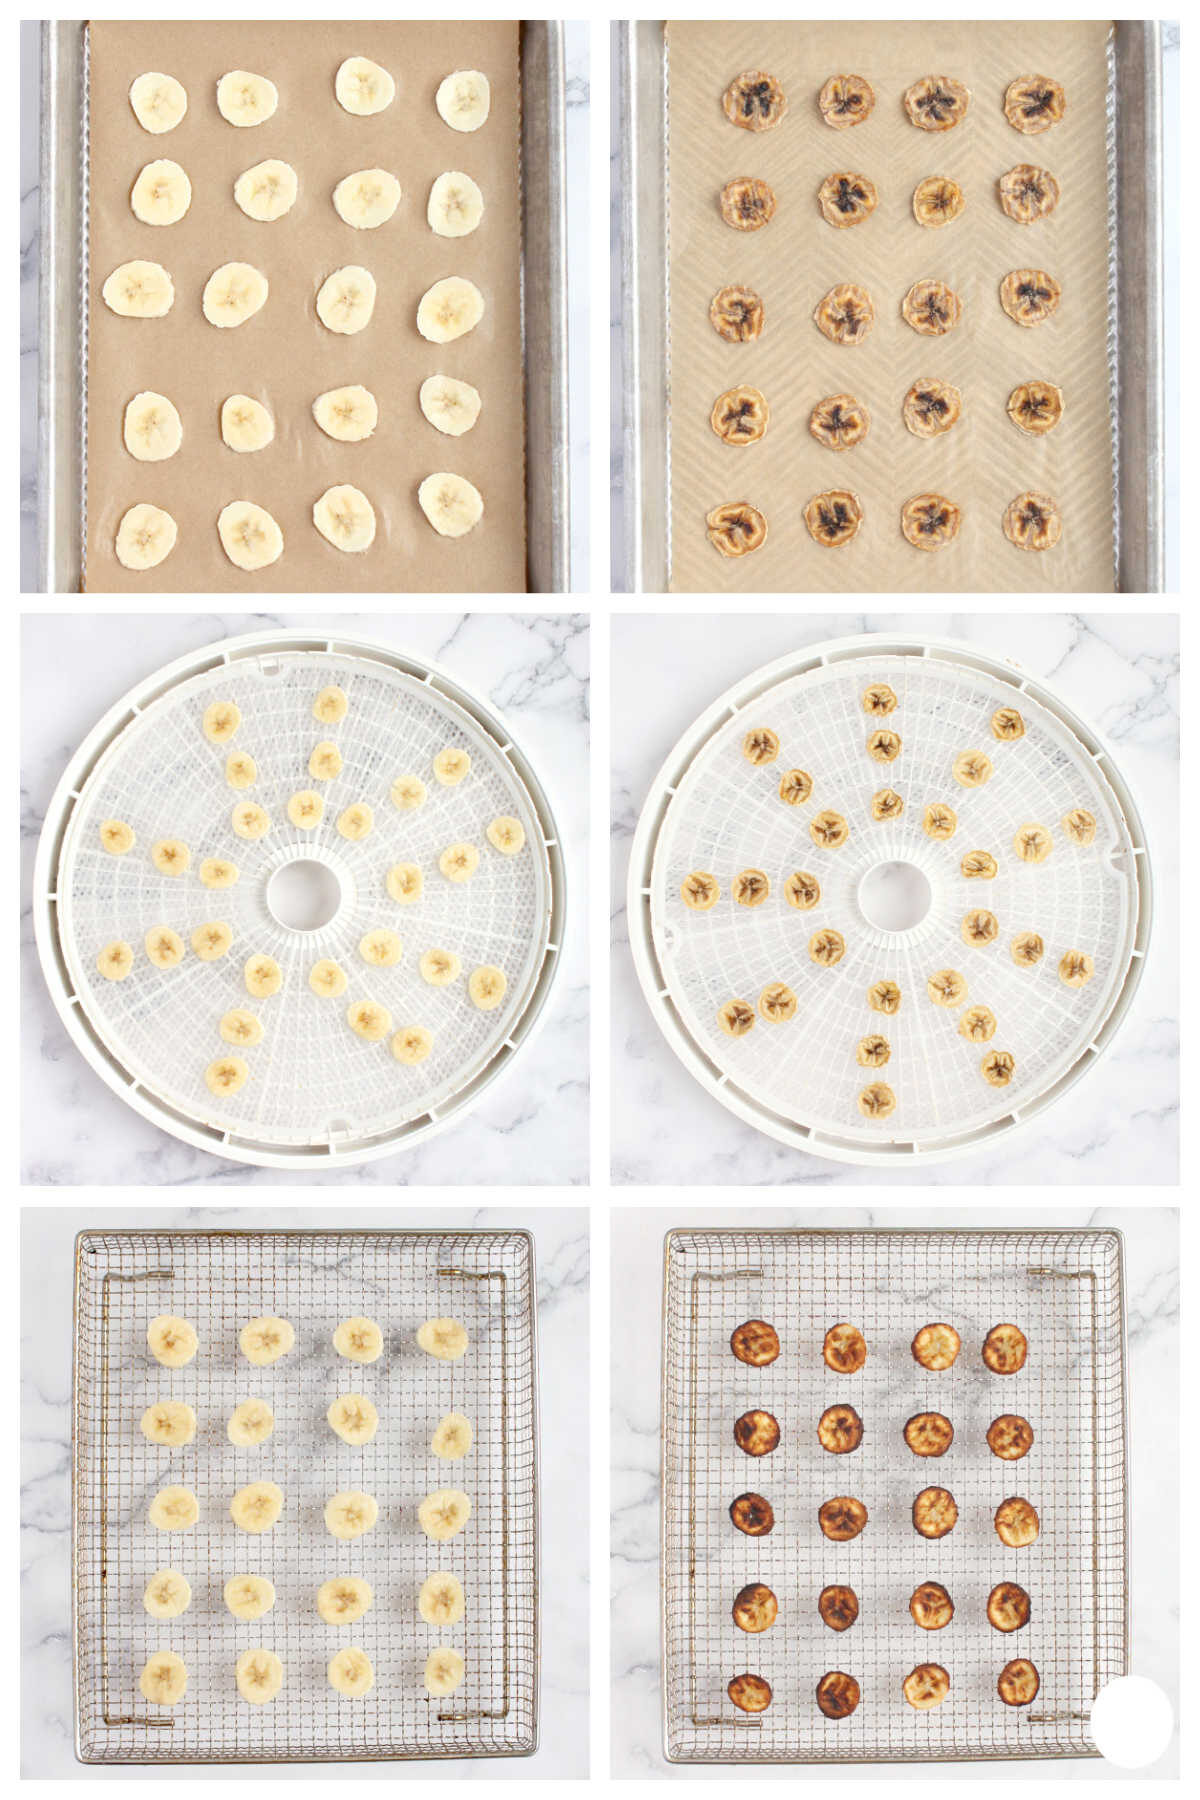 three different methods for making homemade banana chips: oven method, dehydrator  method, and air fryer method.  Before being cooked and after being cooked photos of  each method.